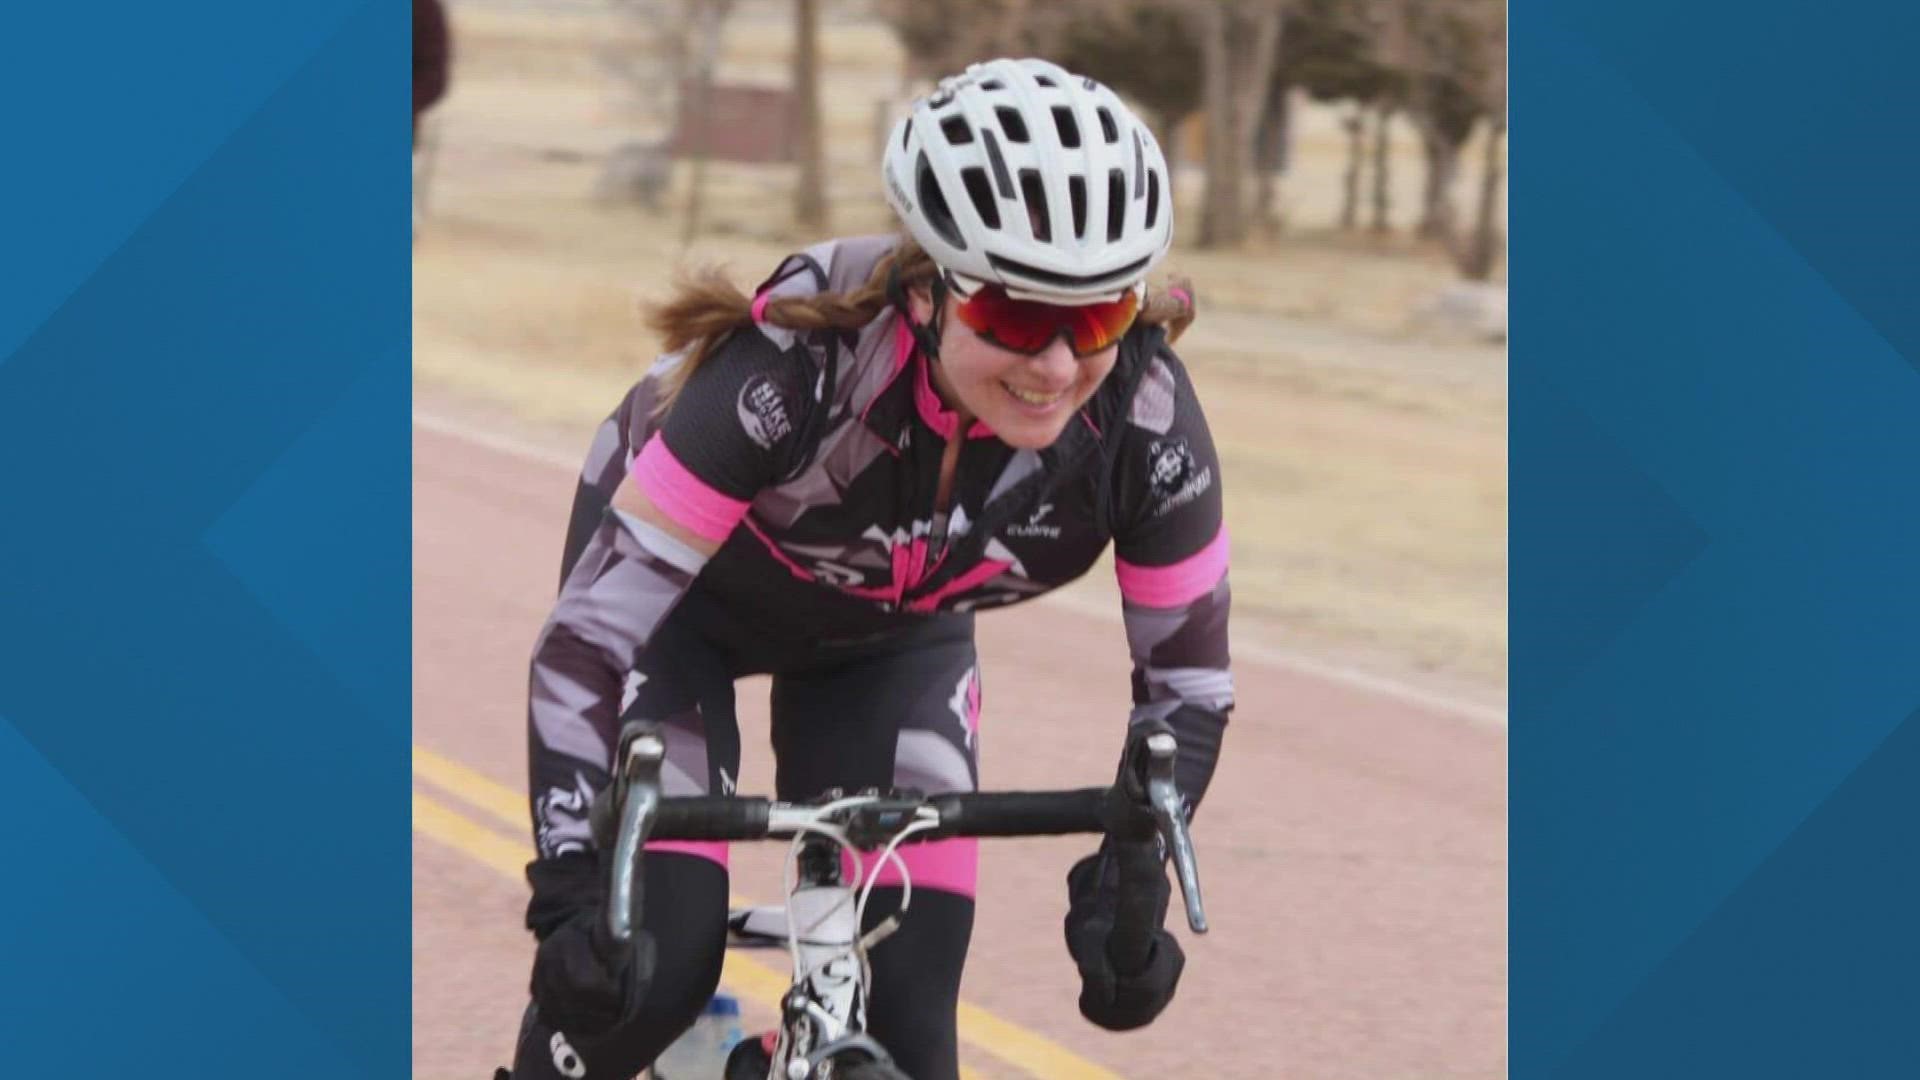 Jennifer Ludwig said her mother, Lisa, was actively competing in and winning races at 61 years old. She also loves to ride her bike on the weekends.